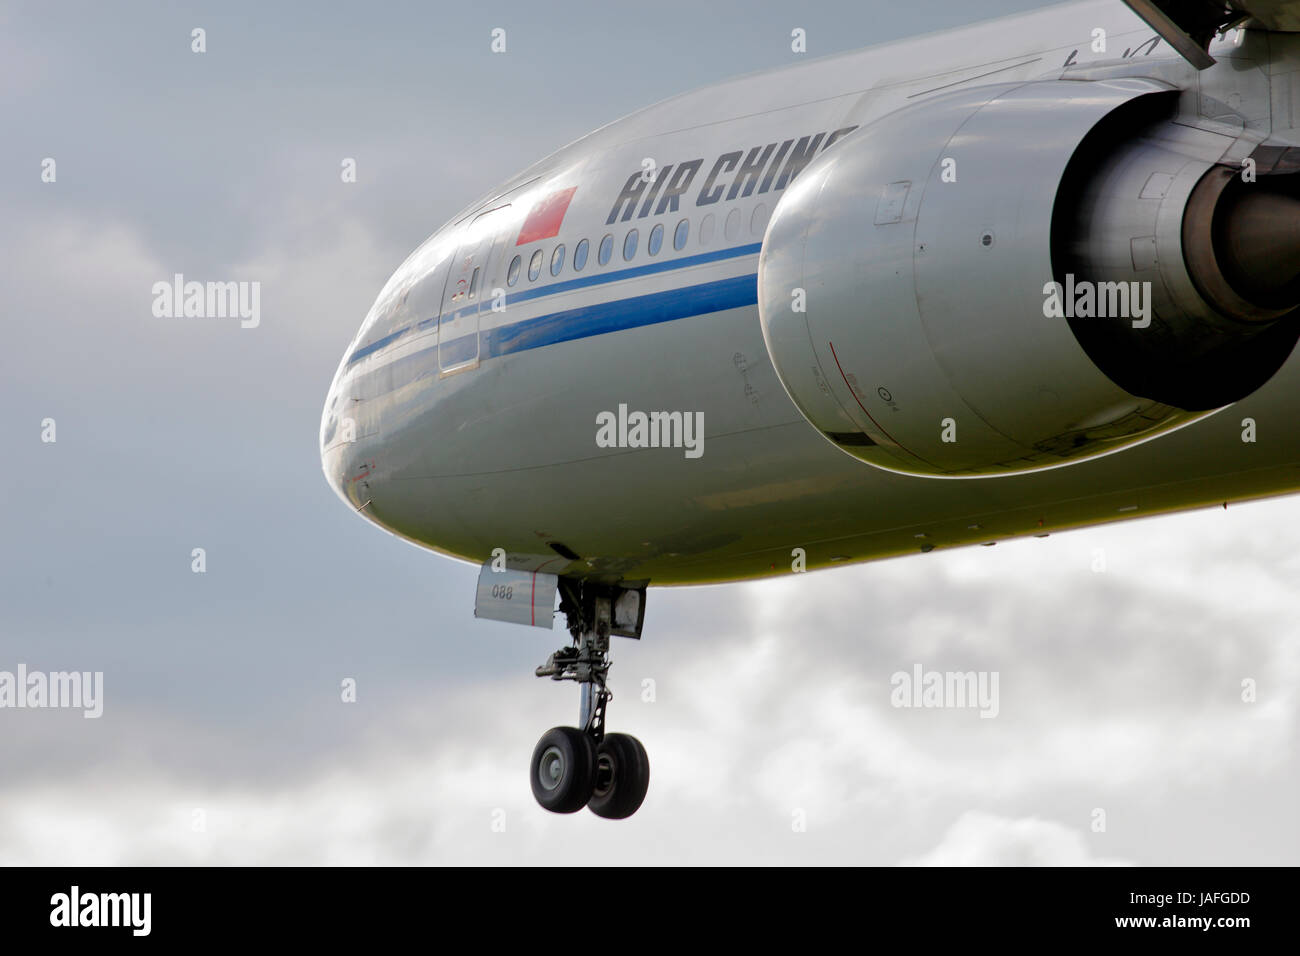 B-2088 Air China Boeing 777-300 cn-38668/979 tight shot of nose and engine, on approach to London Heathrow airport Stock Photo